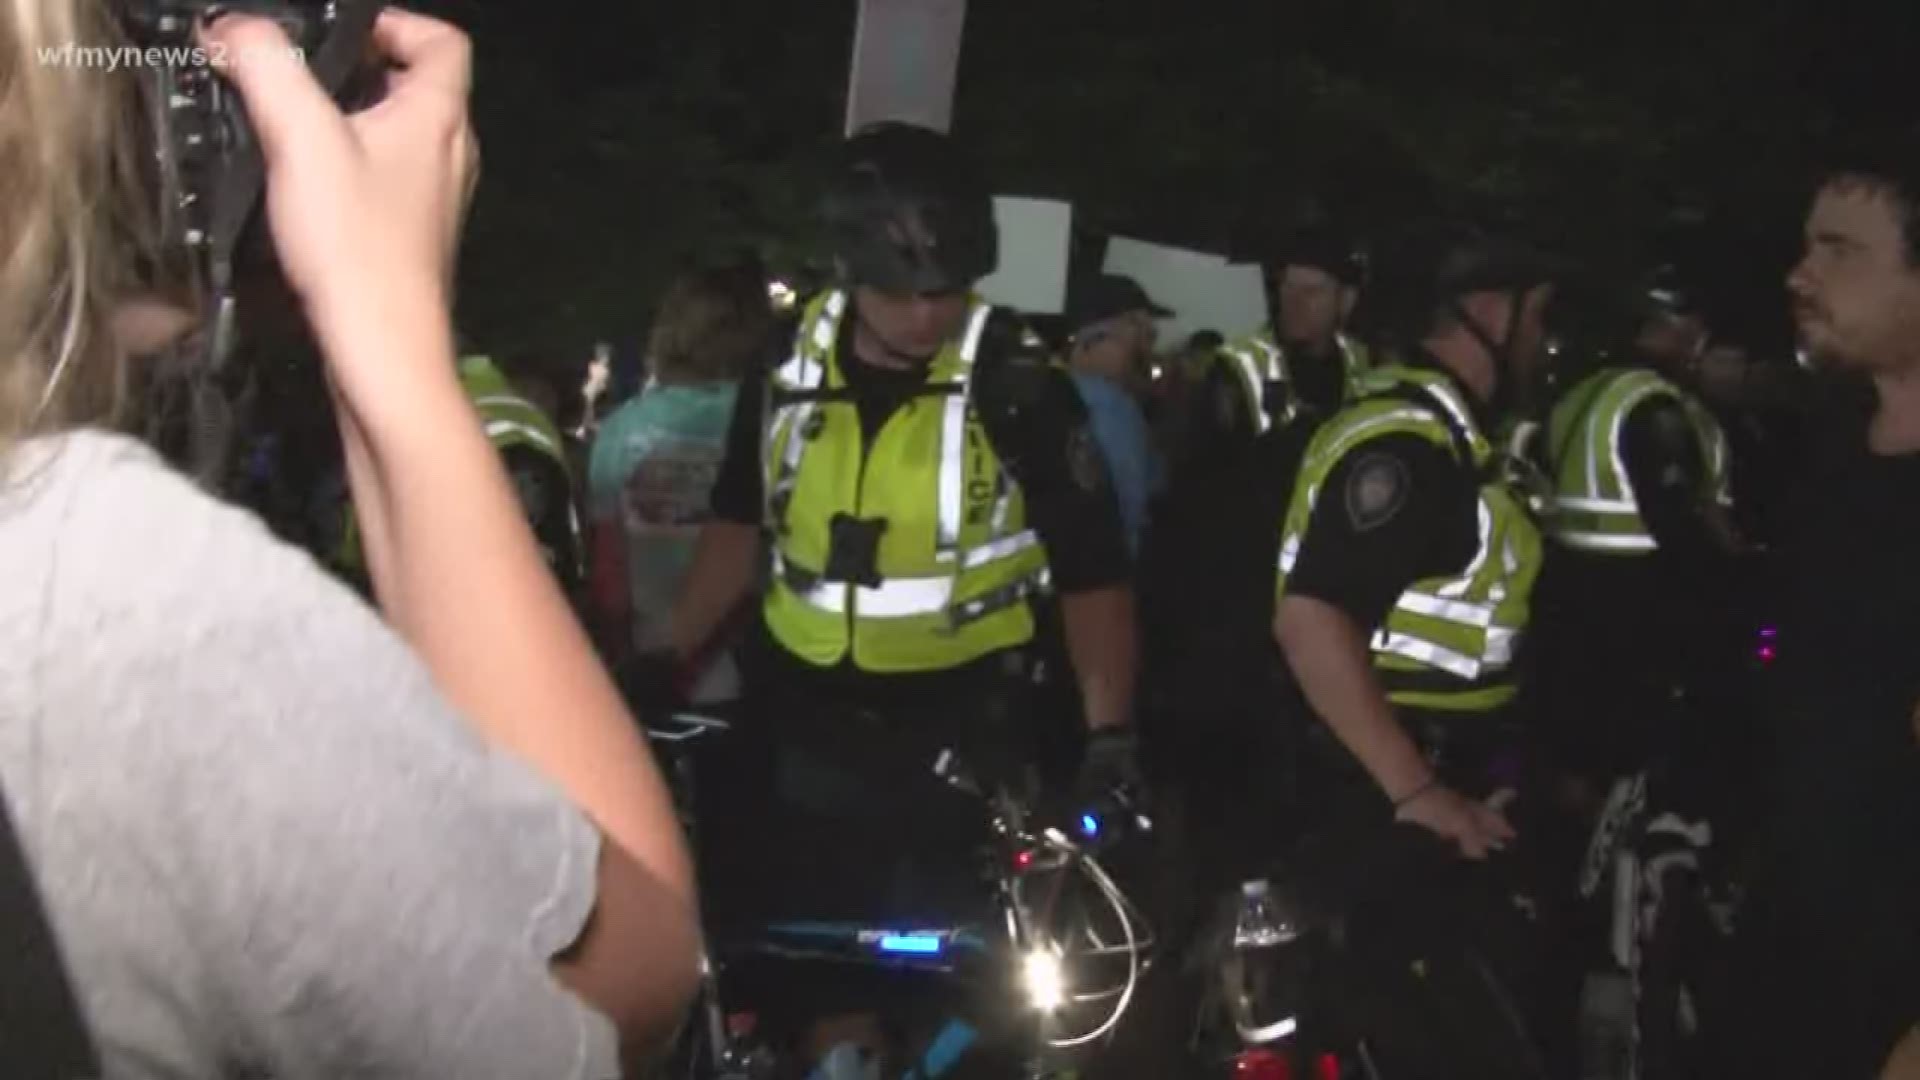 A new report released by the UNC System says UNC Chapel Hill Police weren't prepared to handle the demonstration the night the confederate monument was toppled.